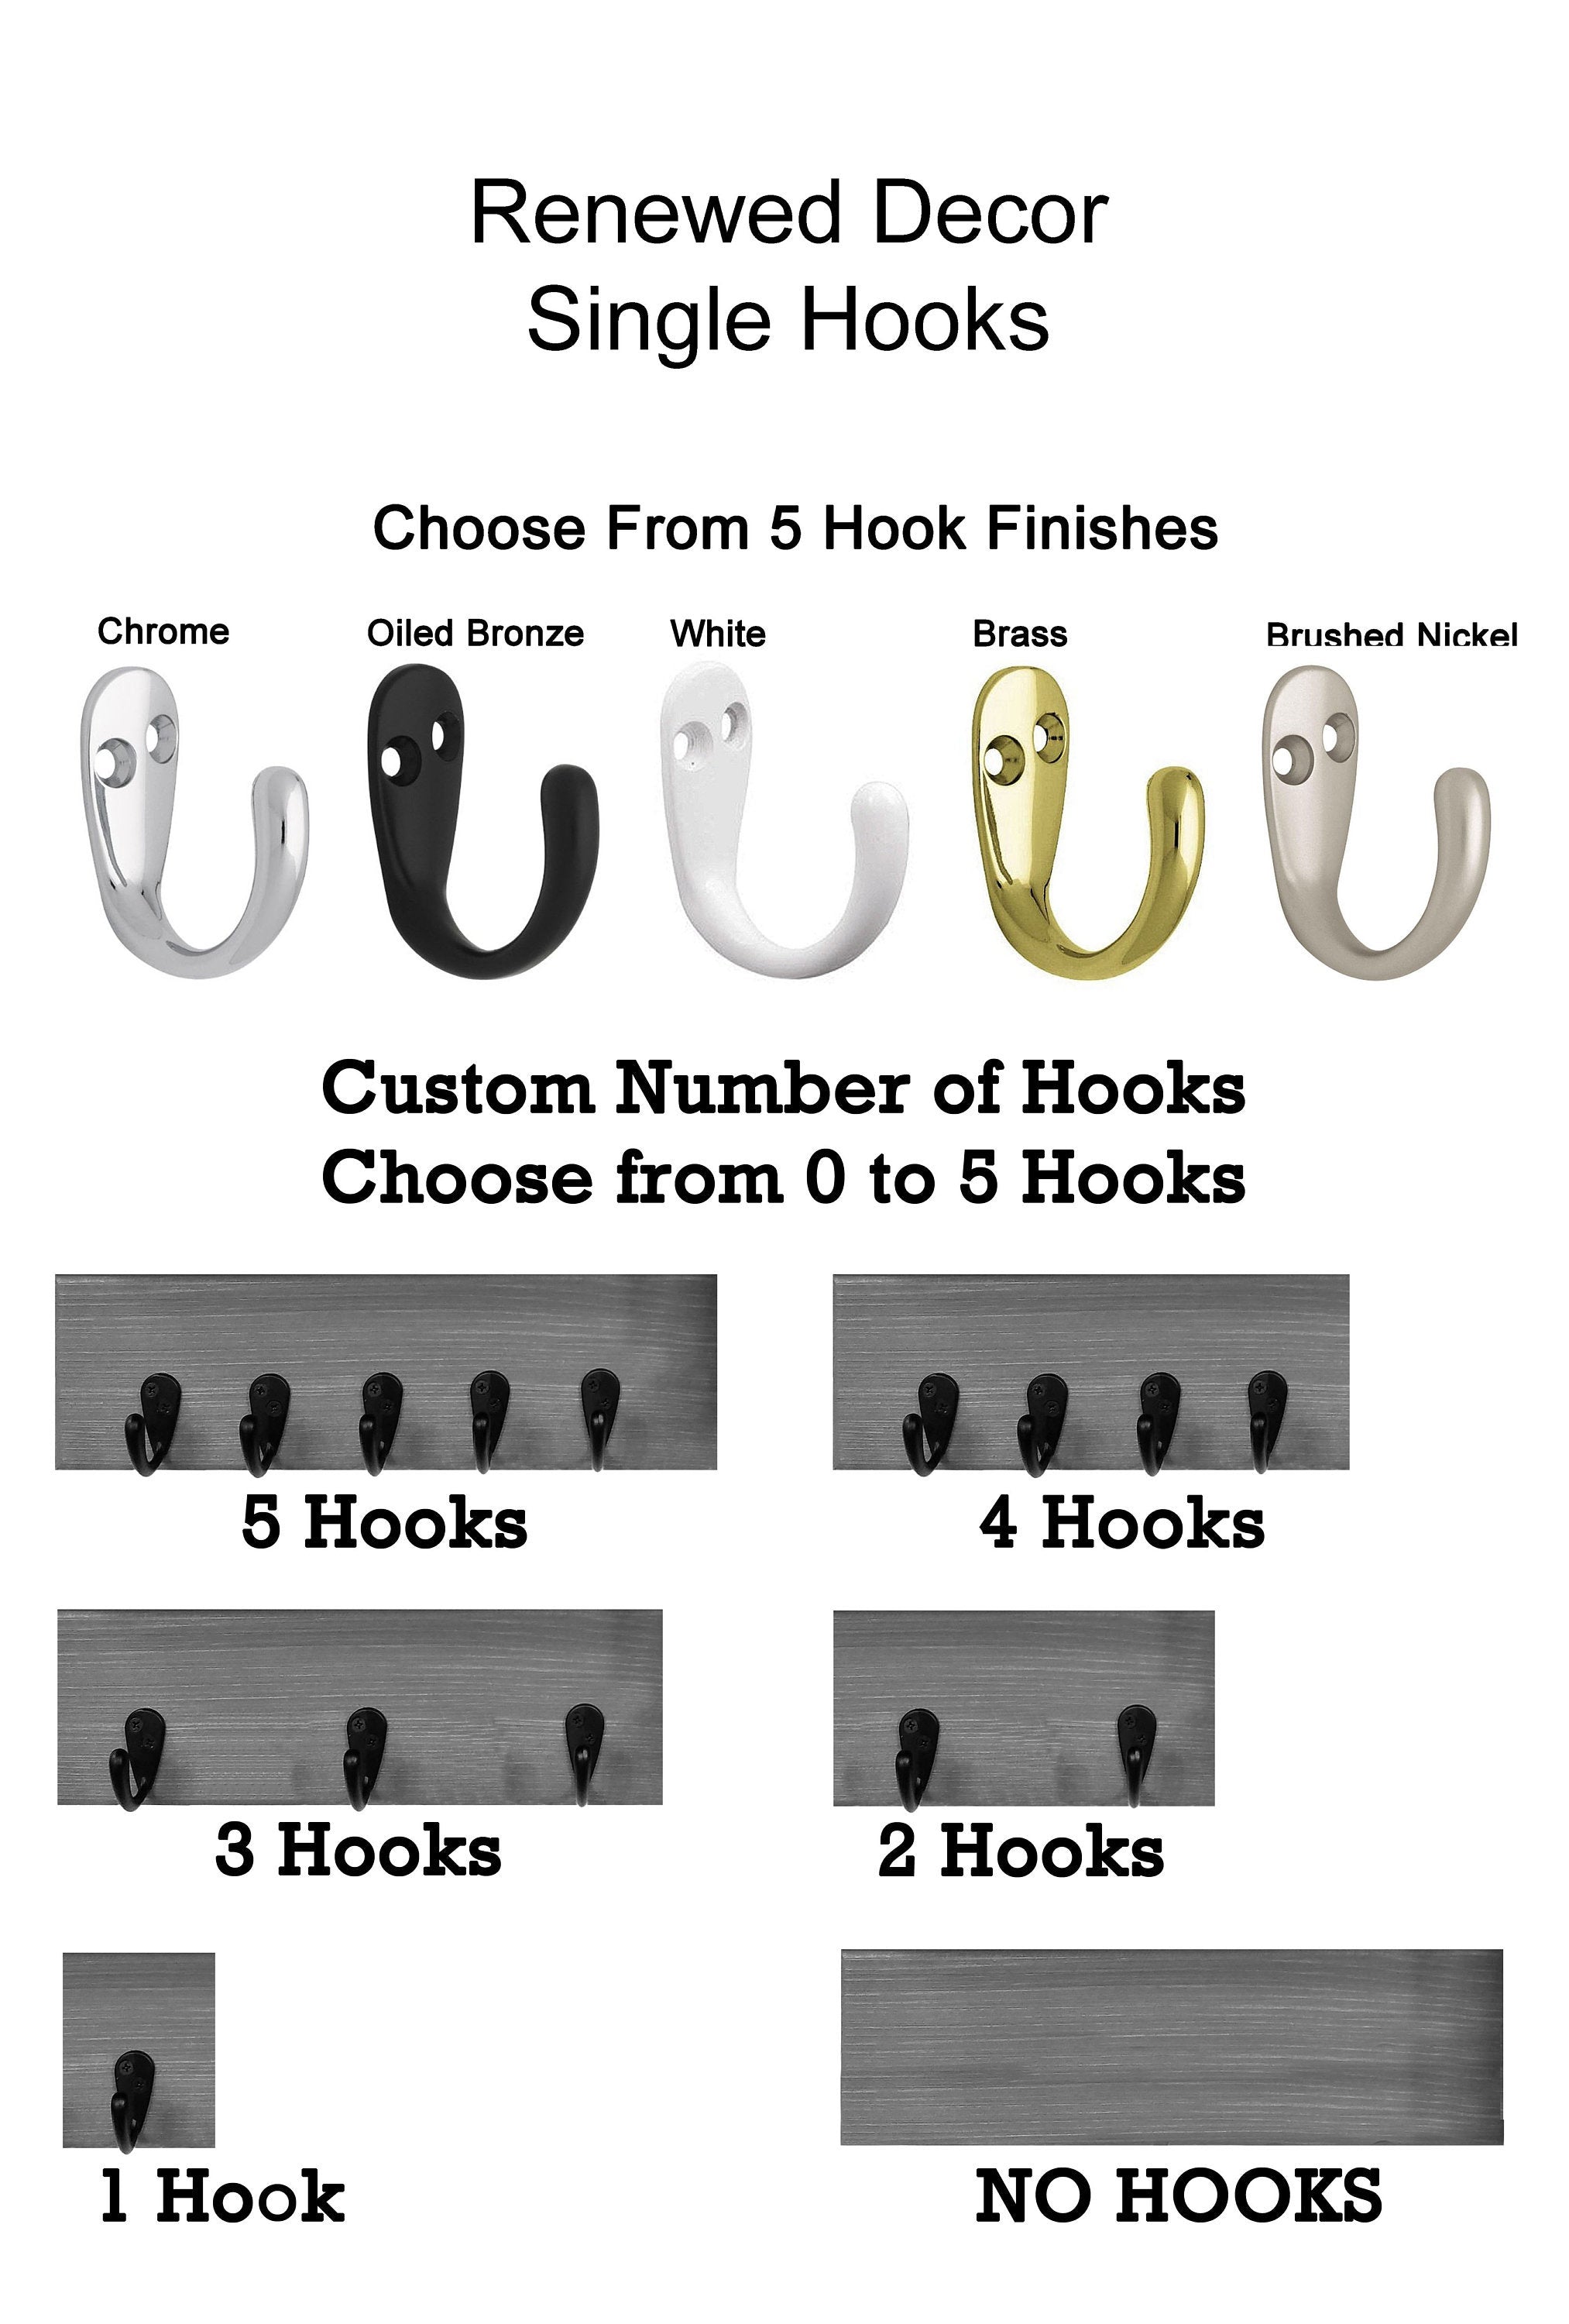 Number of Single Hooks in 5 Finishes, Oiled Bronze, Nickel, Chrome, Brass, White